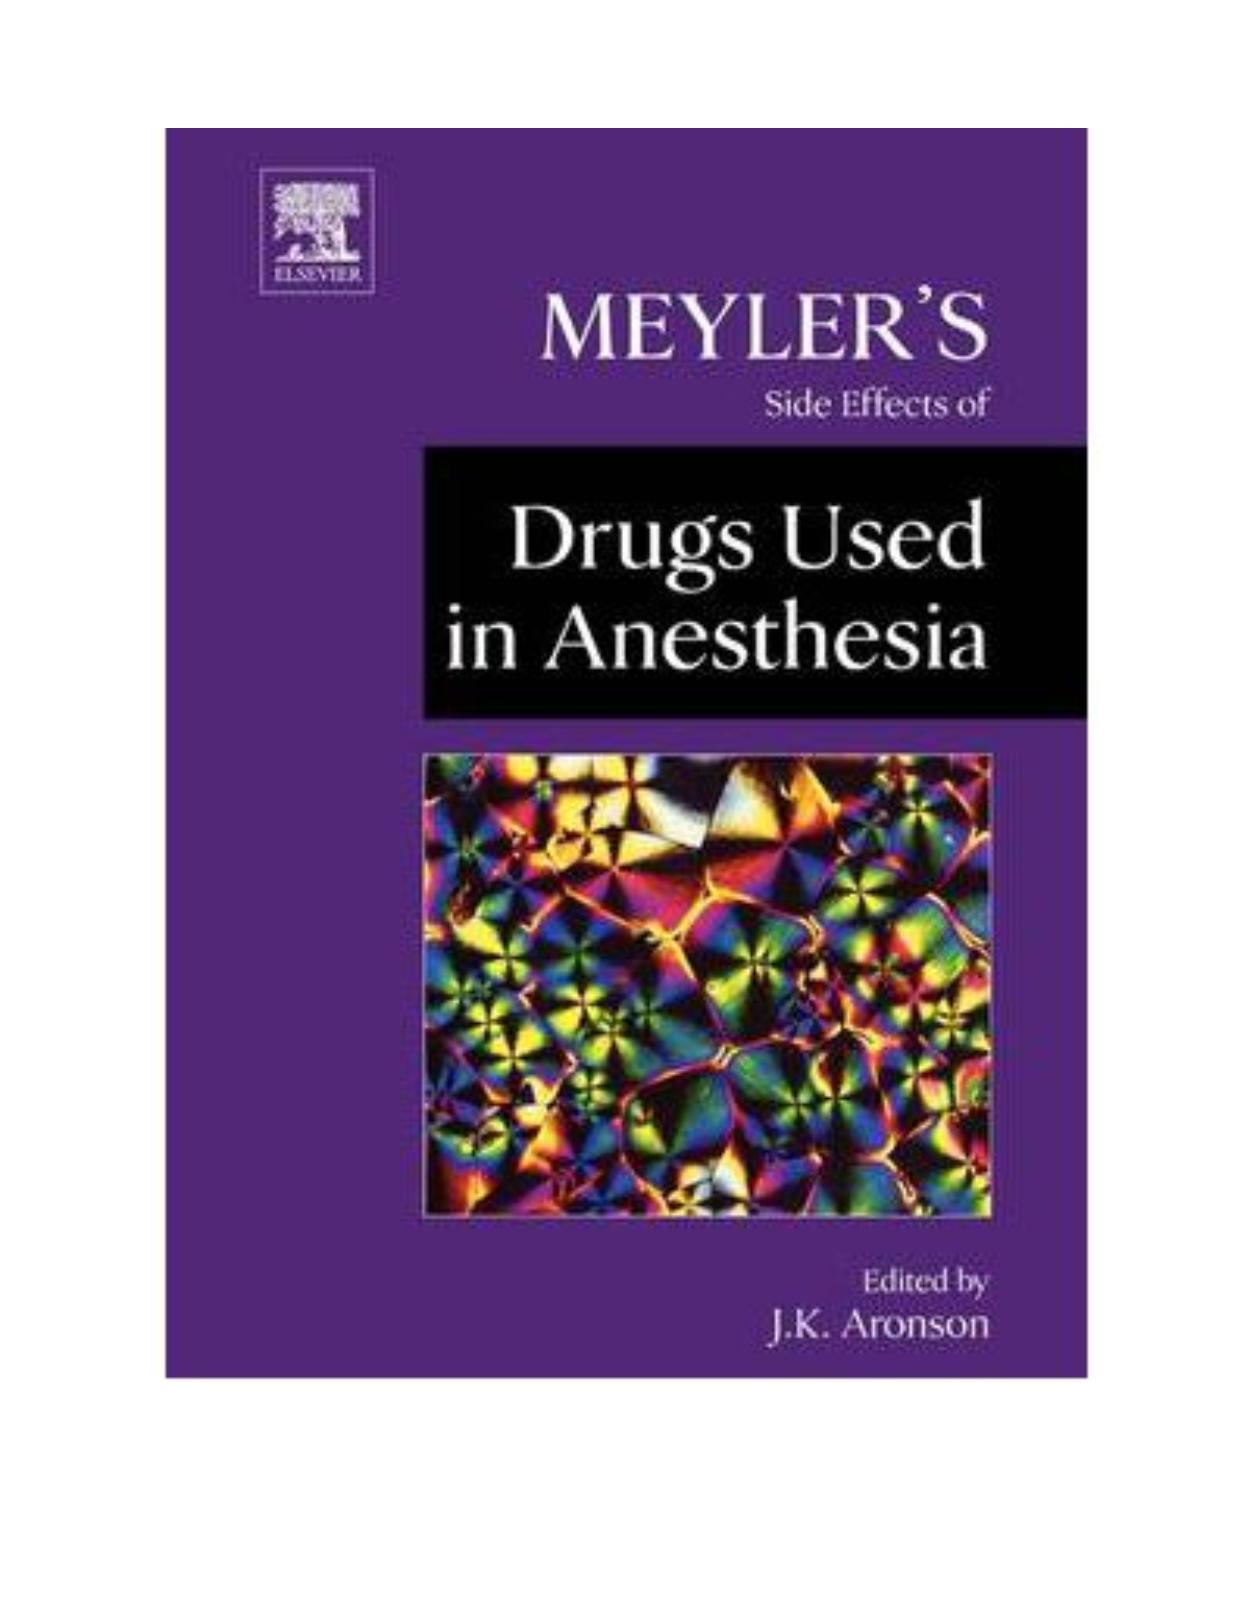 Meyler's Side Effects of Anesthetic Drugs Used in Anesthesia